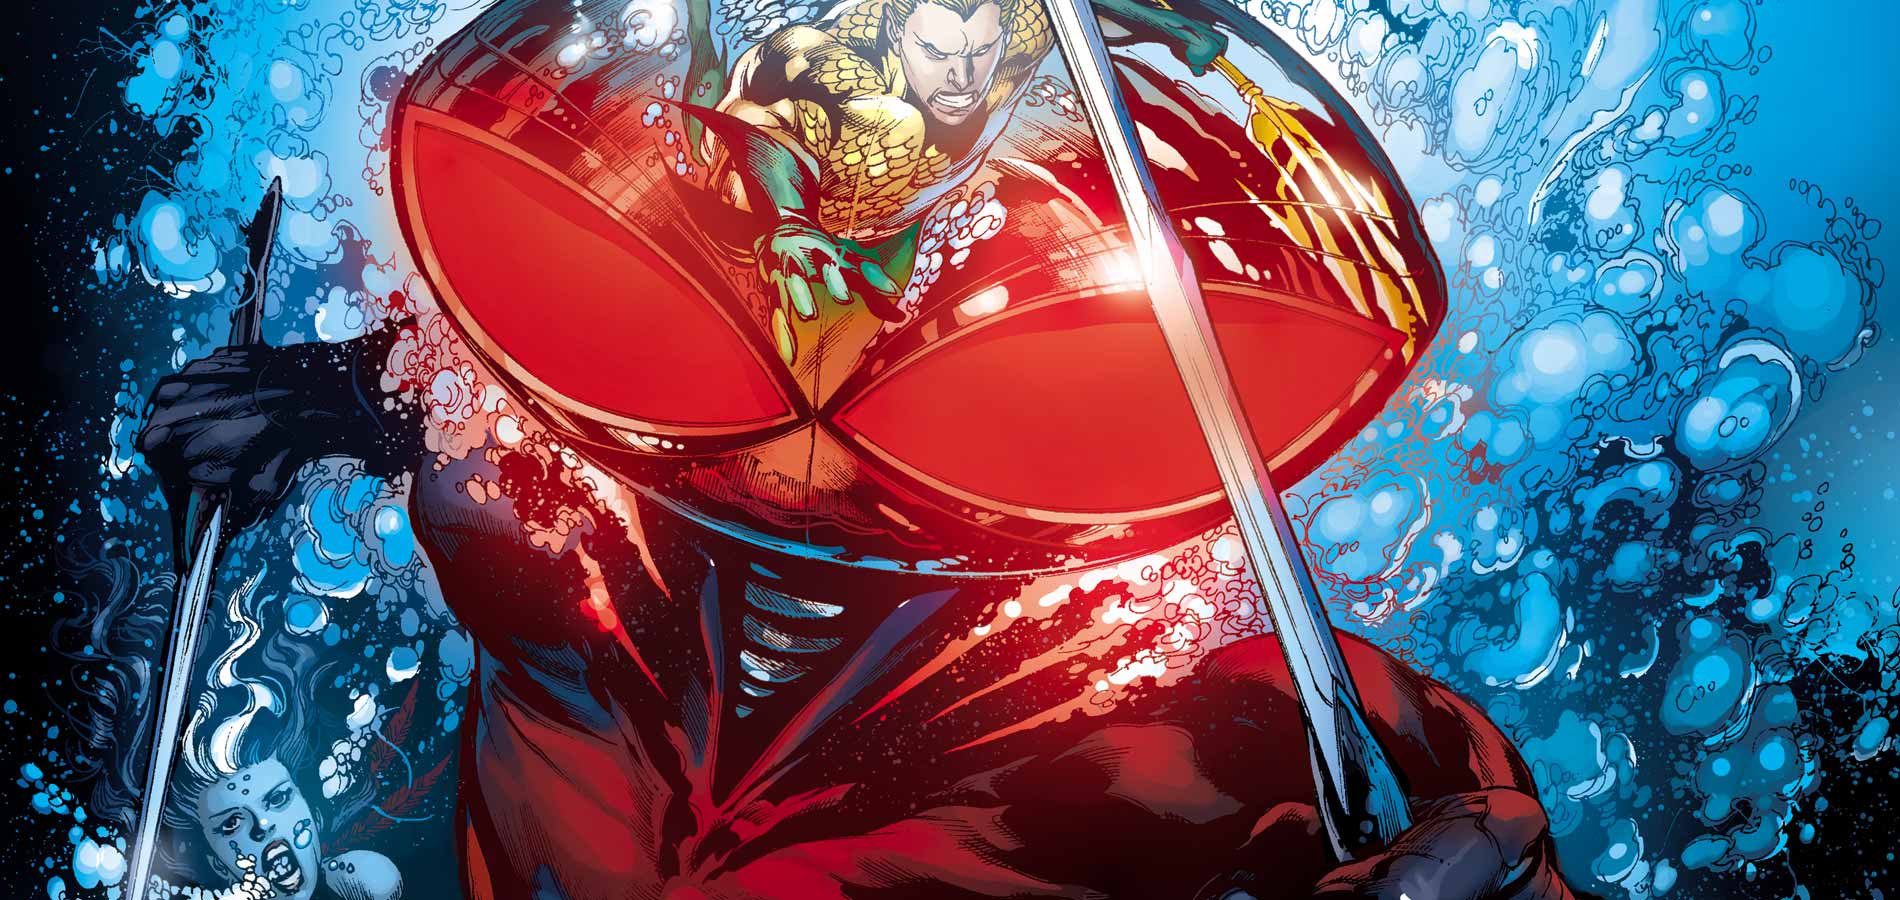 Aquaman may be just the beginning of Black Manta's rise in the DCEU